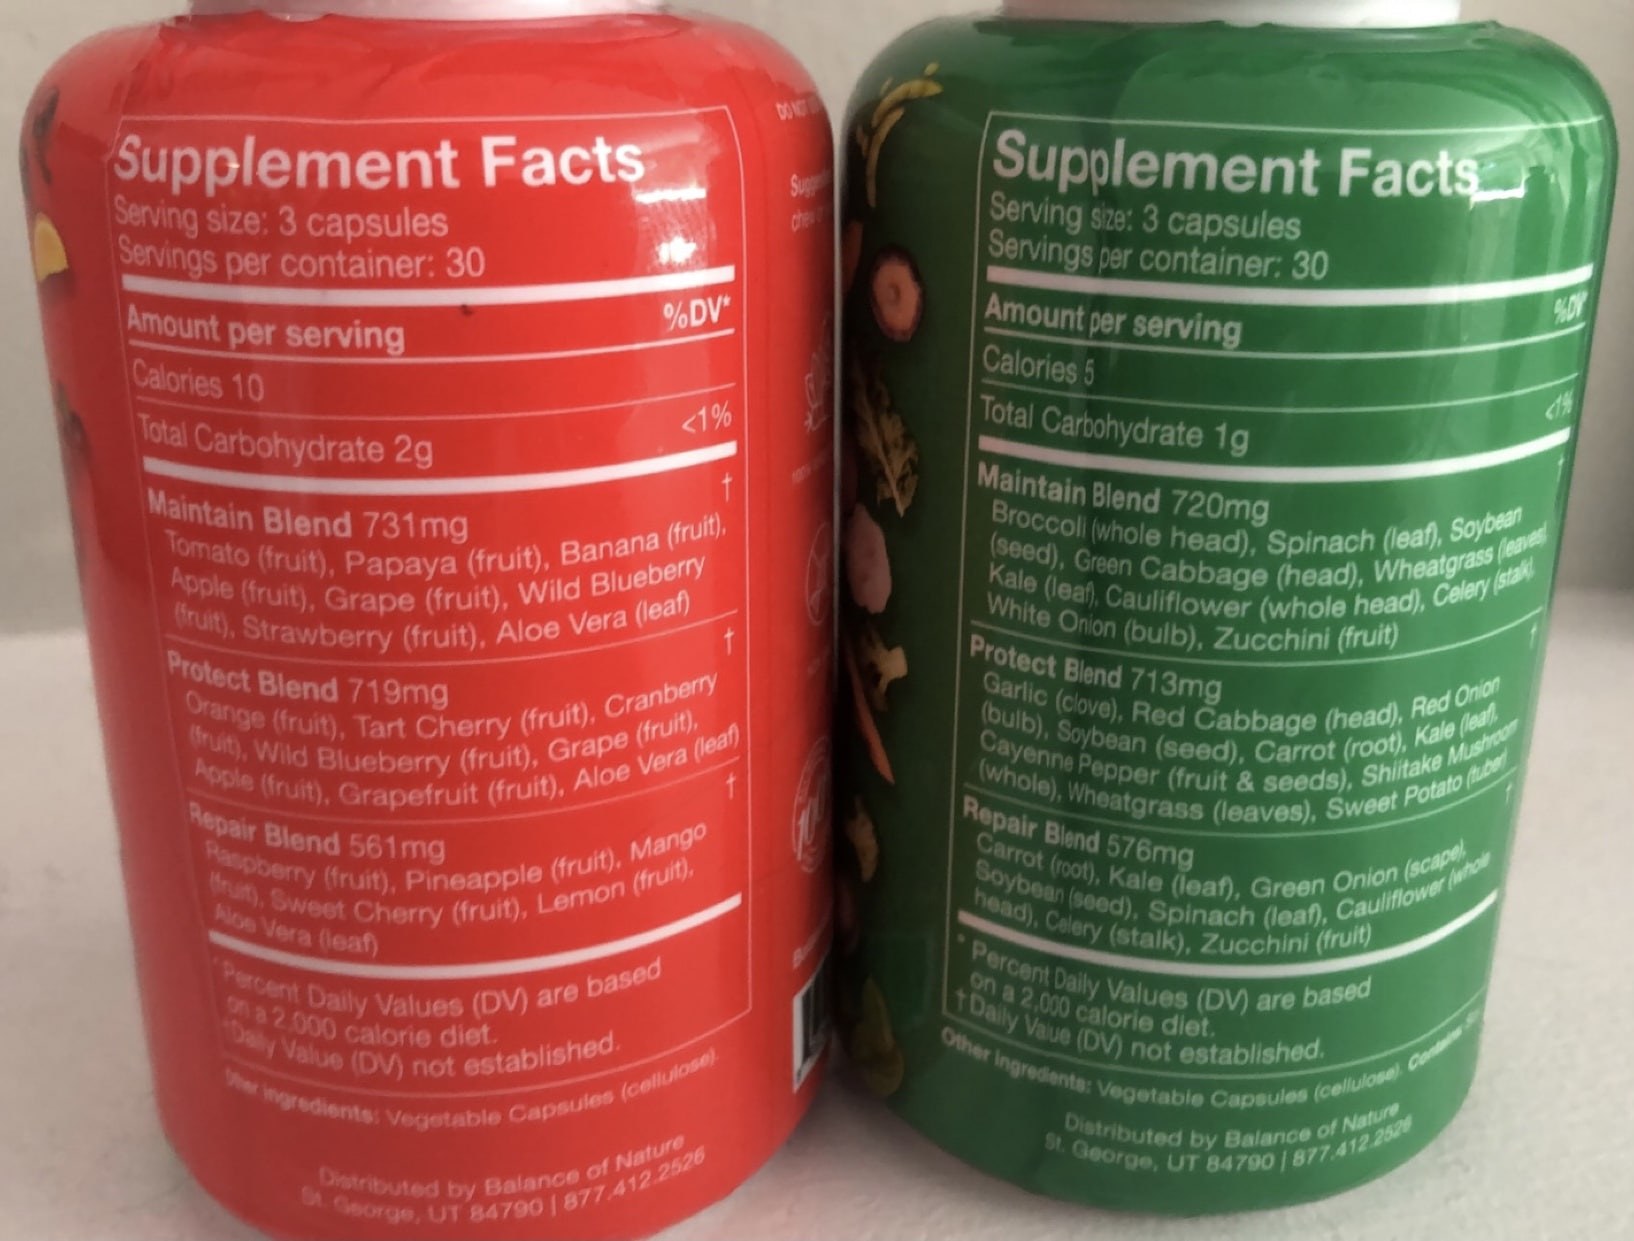 Balance of nature ingredients and supplement facts